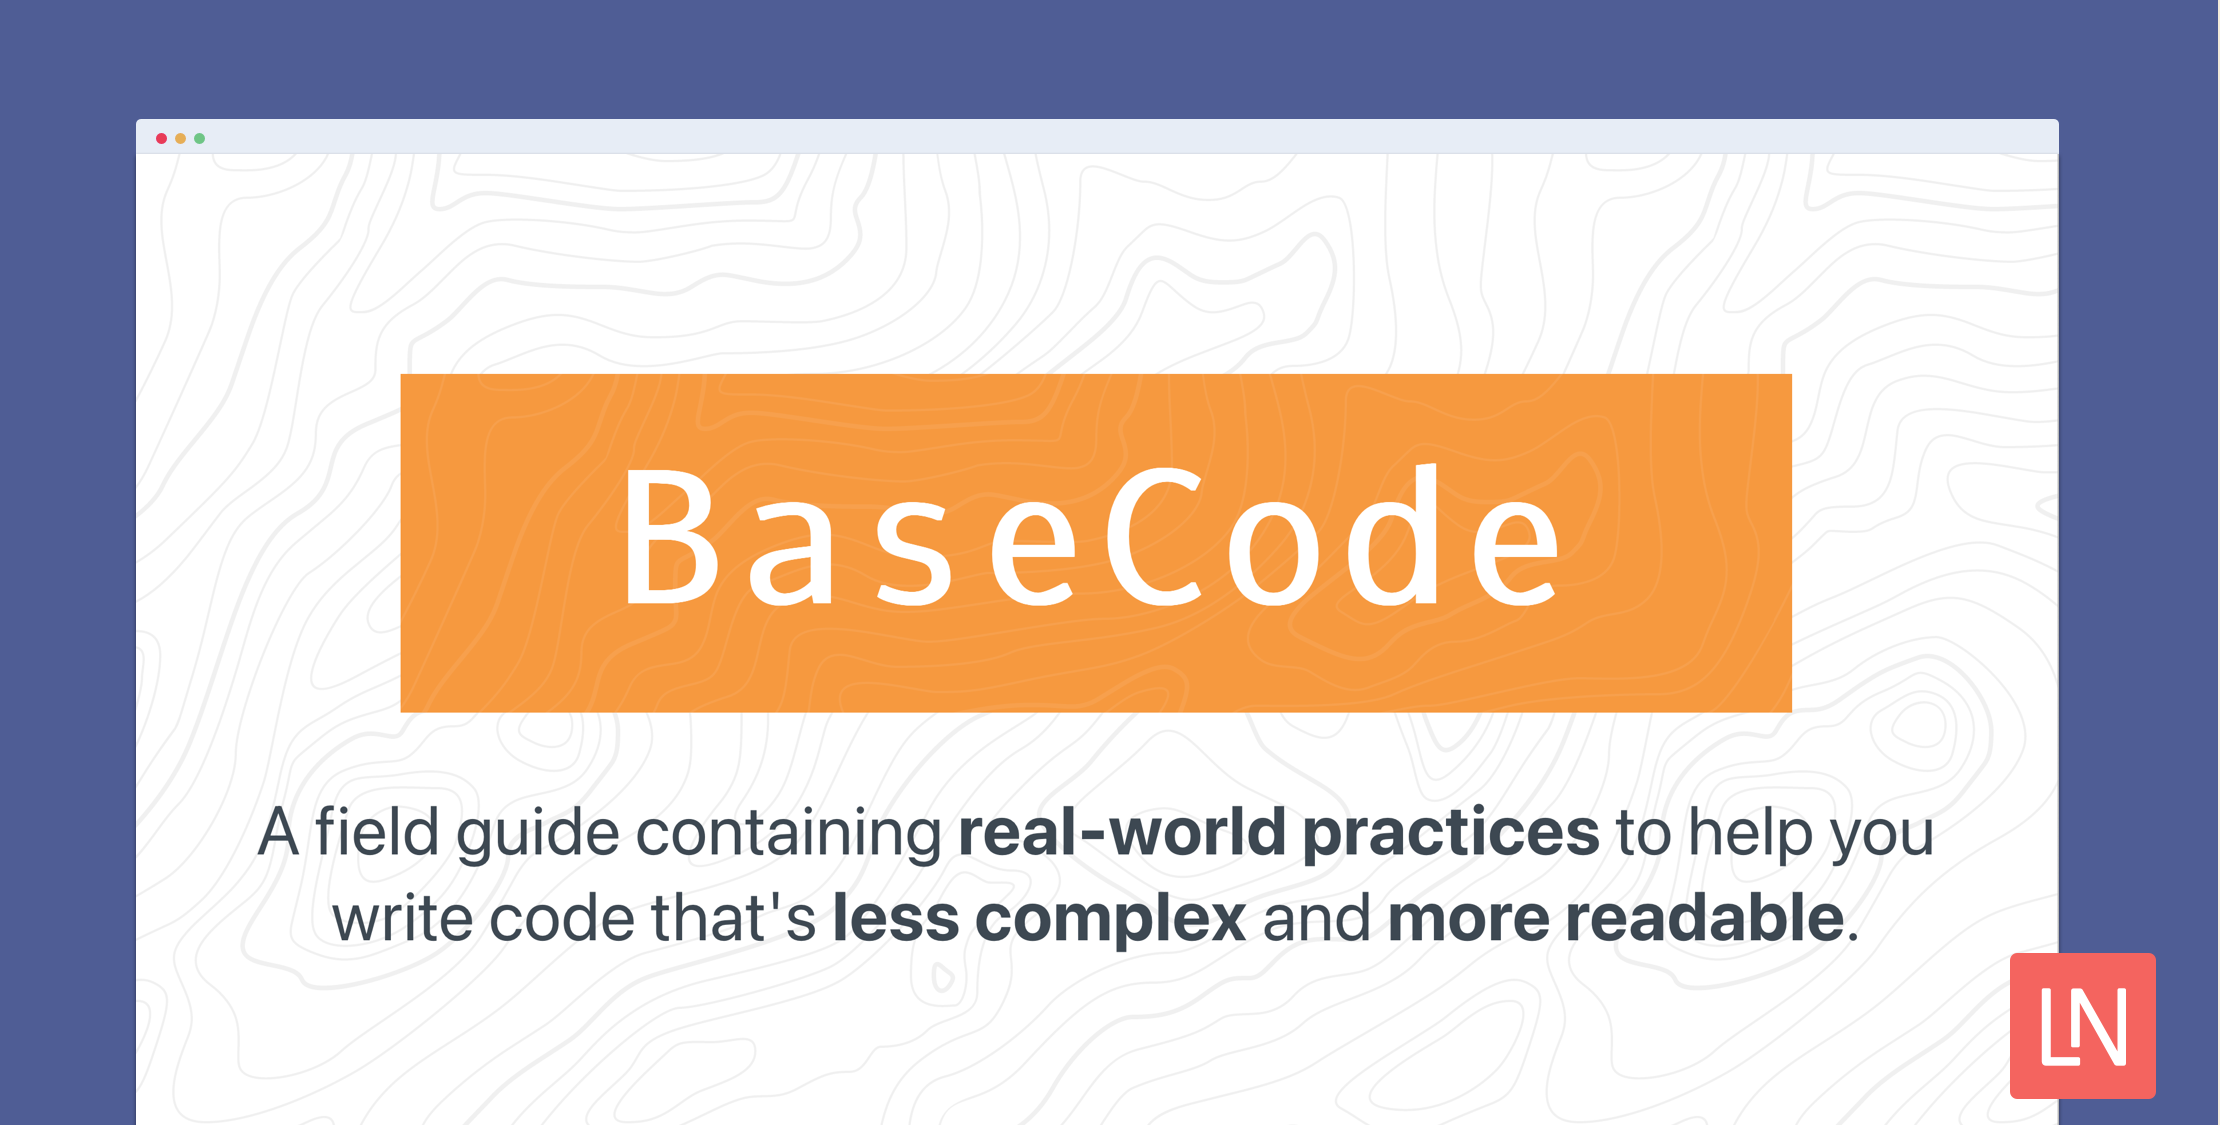 BaseCode: A Field Guide to Writing More Readable Code image